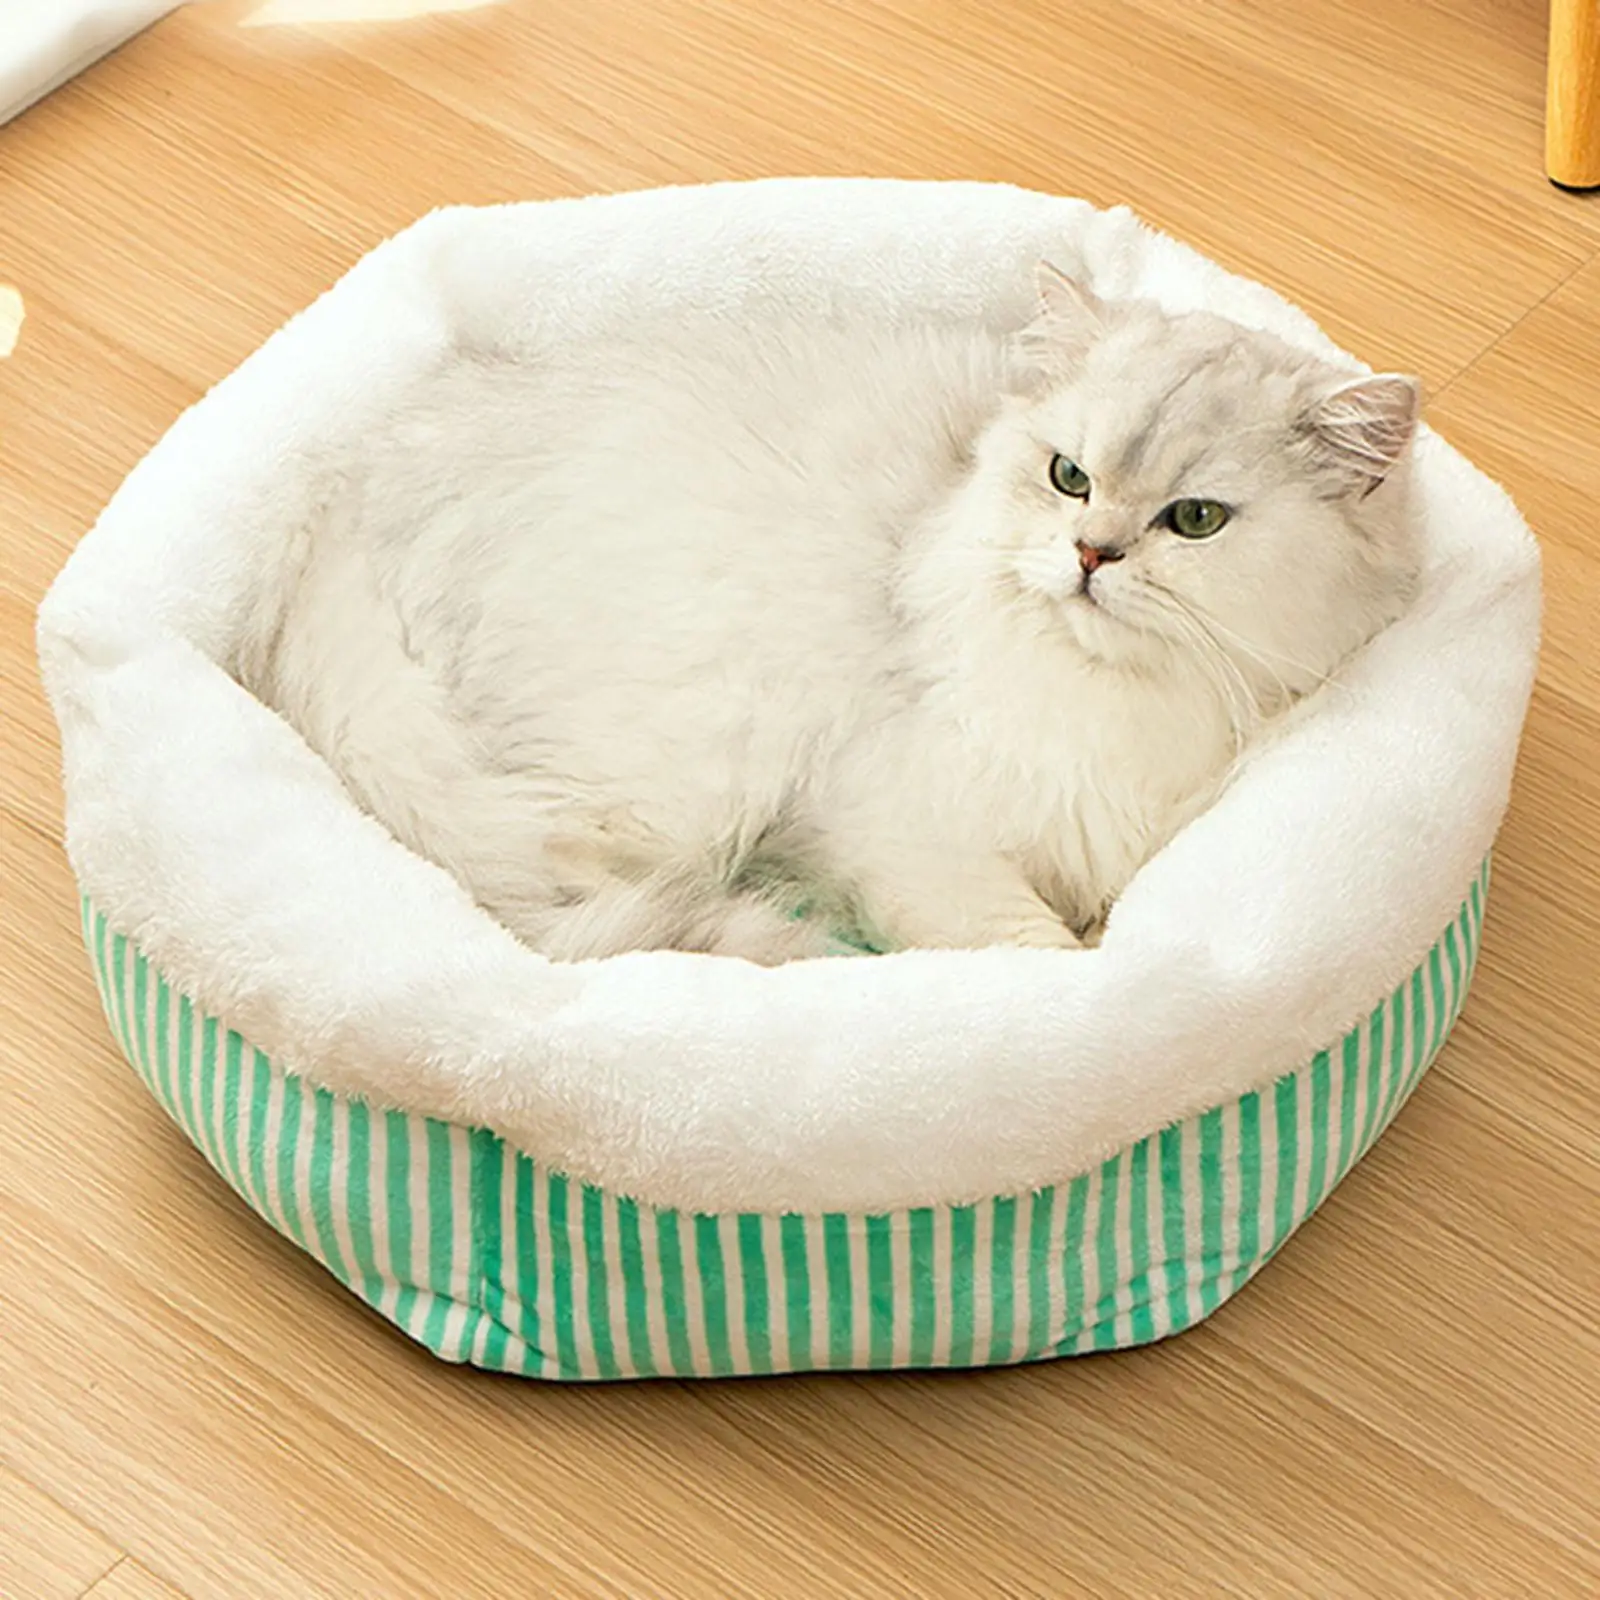 Comfy Cat Dog Cushion Bed Soft Warming Comfortable Anti Slip Bottom Mat for Cats Kittens